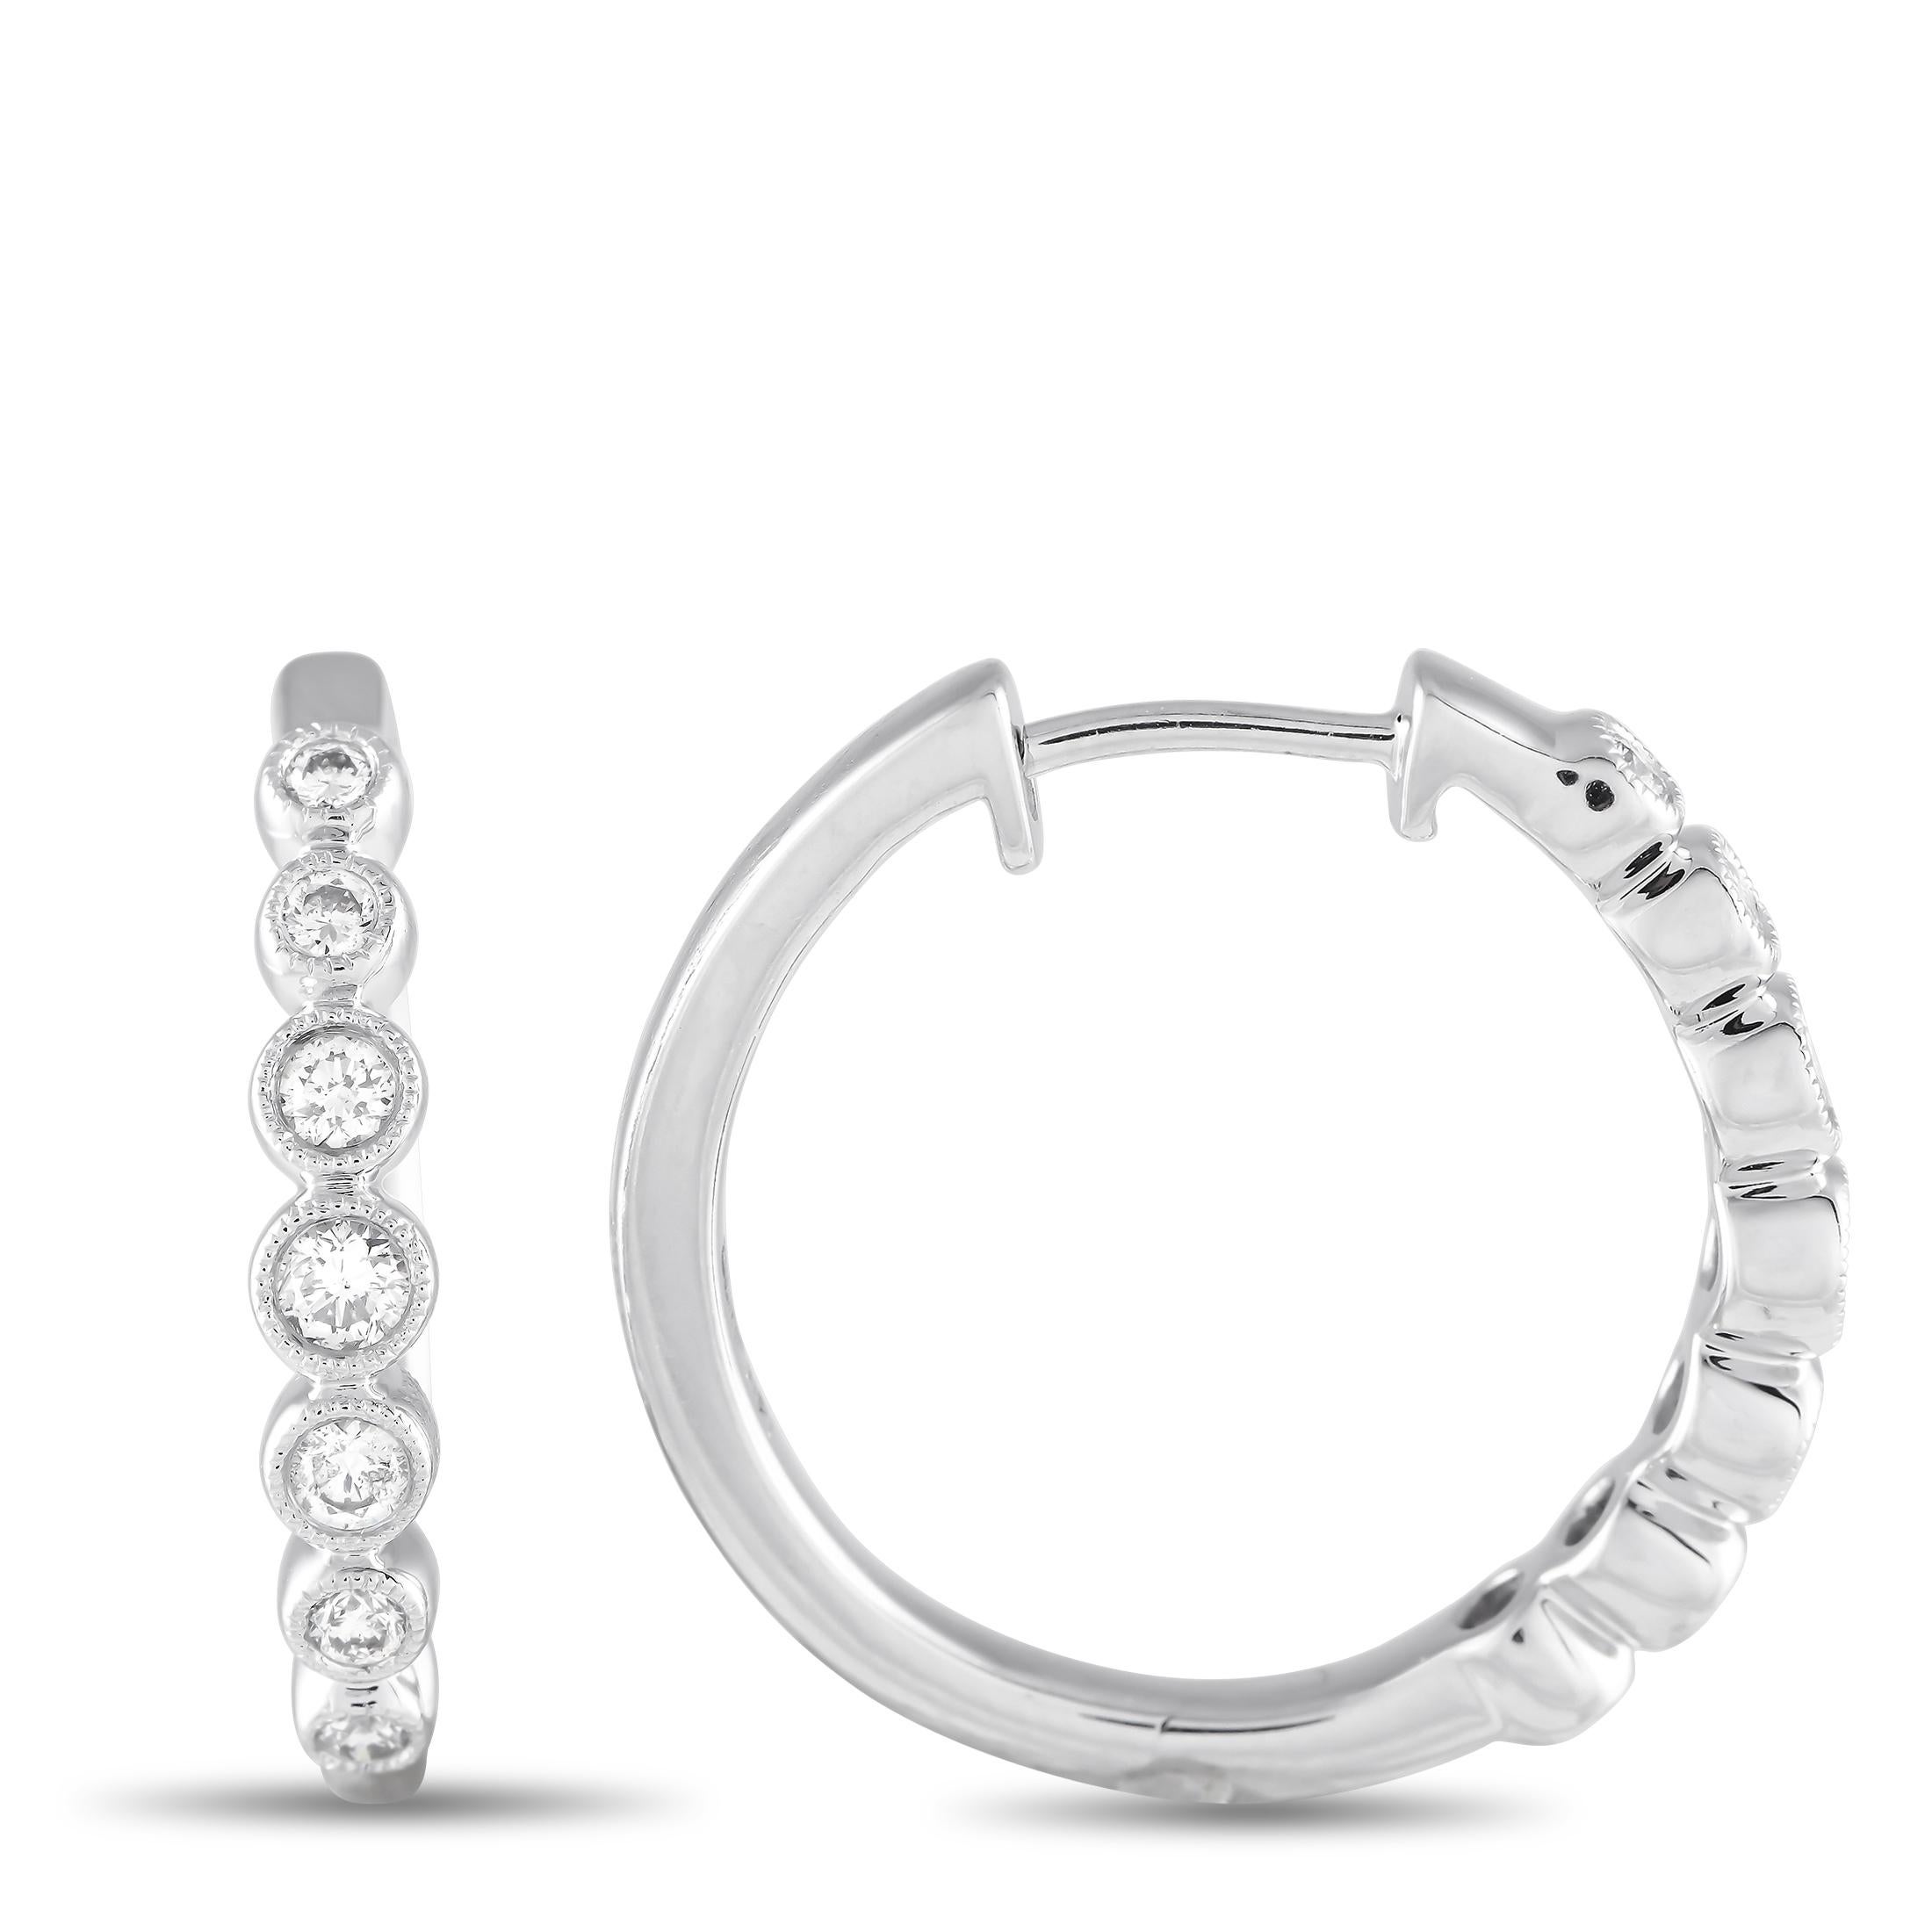 A series of bezel-set Diamonds with a total weight of 0.50 carats make these impeccably crafted hoop earrings unlike anything youve seen before. A contemporary take on a classic accessory, each one measures 0.85 round and features a setting made